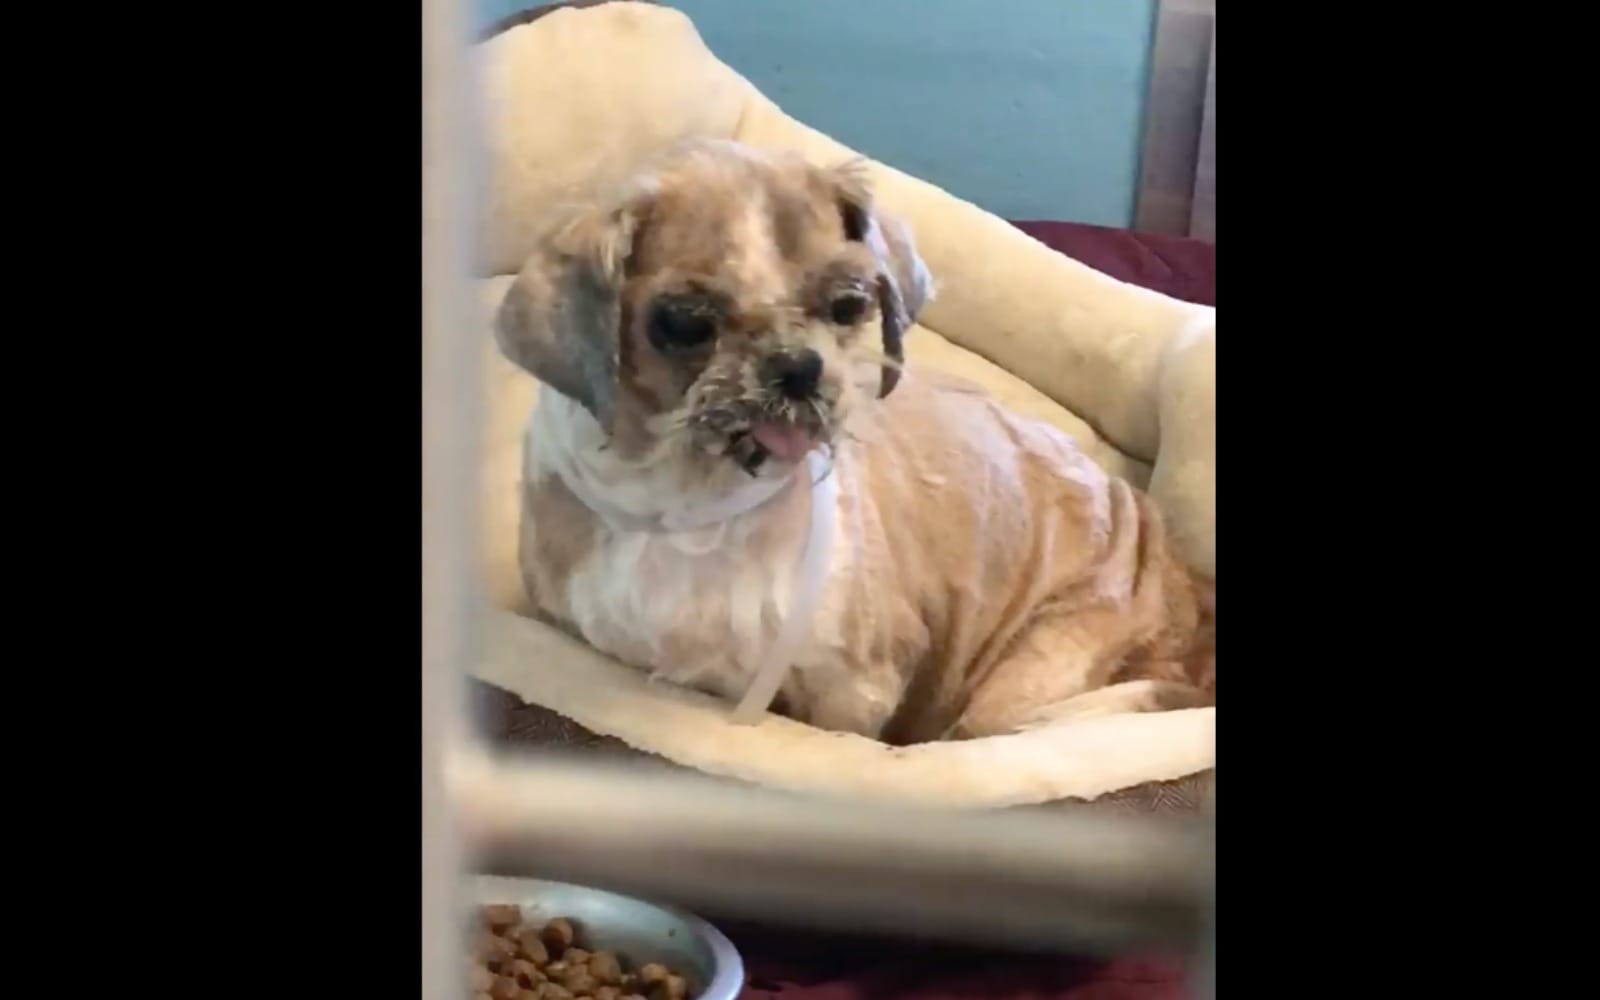 Homeless Dog Covered in Matted Fur and Tumors Gets a Miraculous Makeover and New Life! (VIDEO)